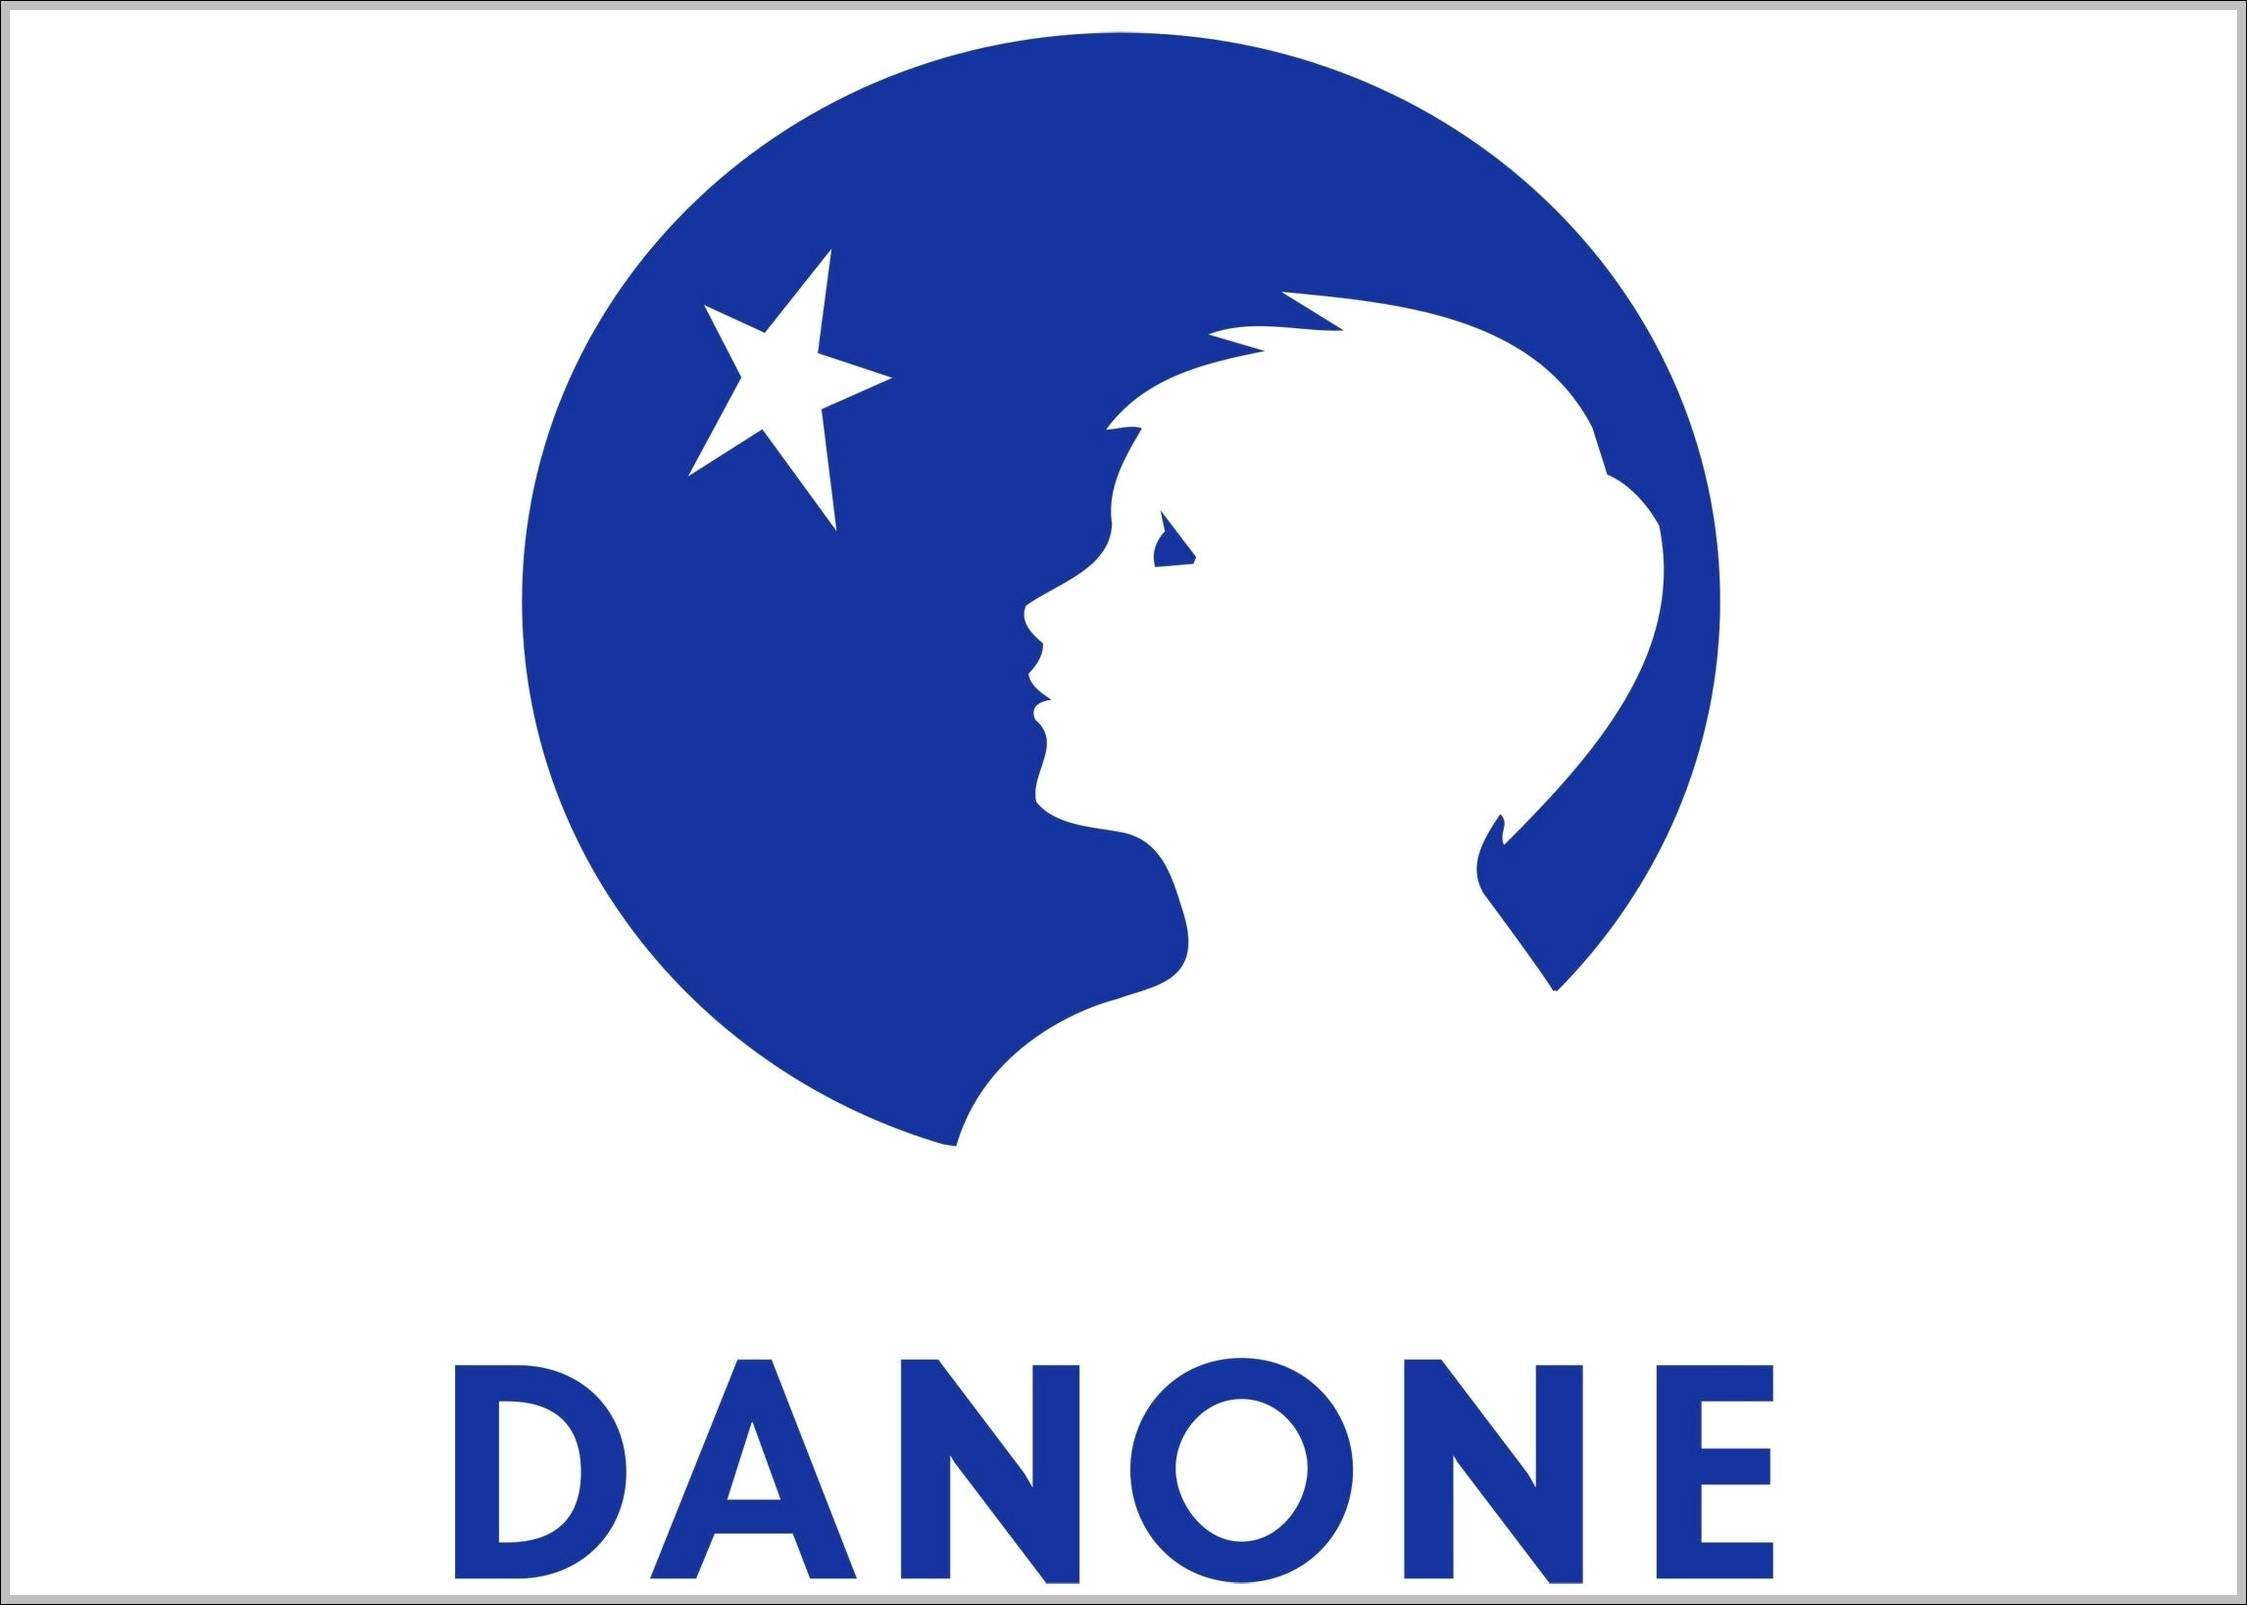 Danone group logo and sign